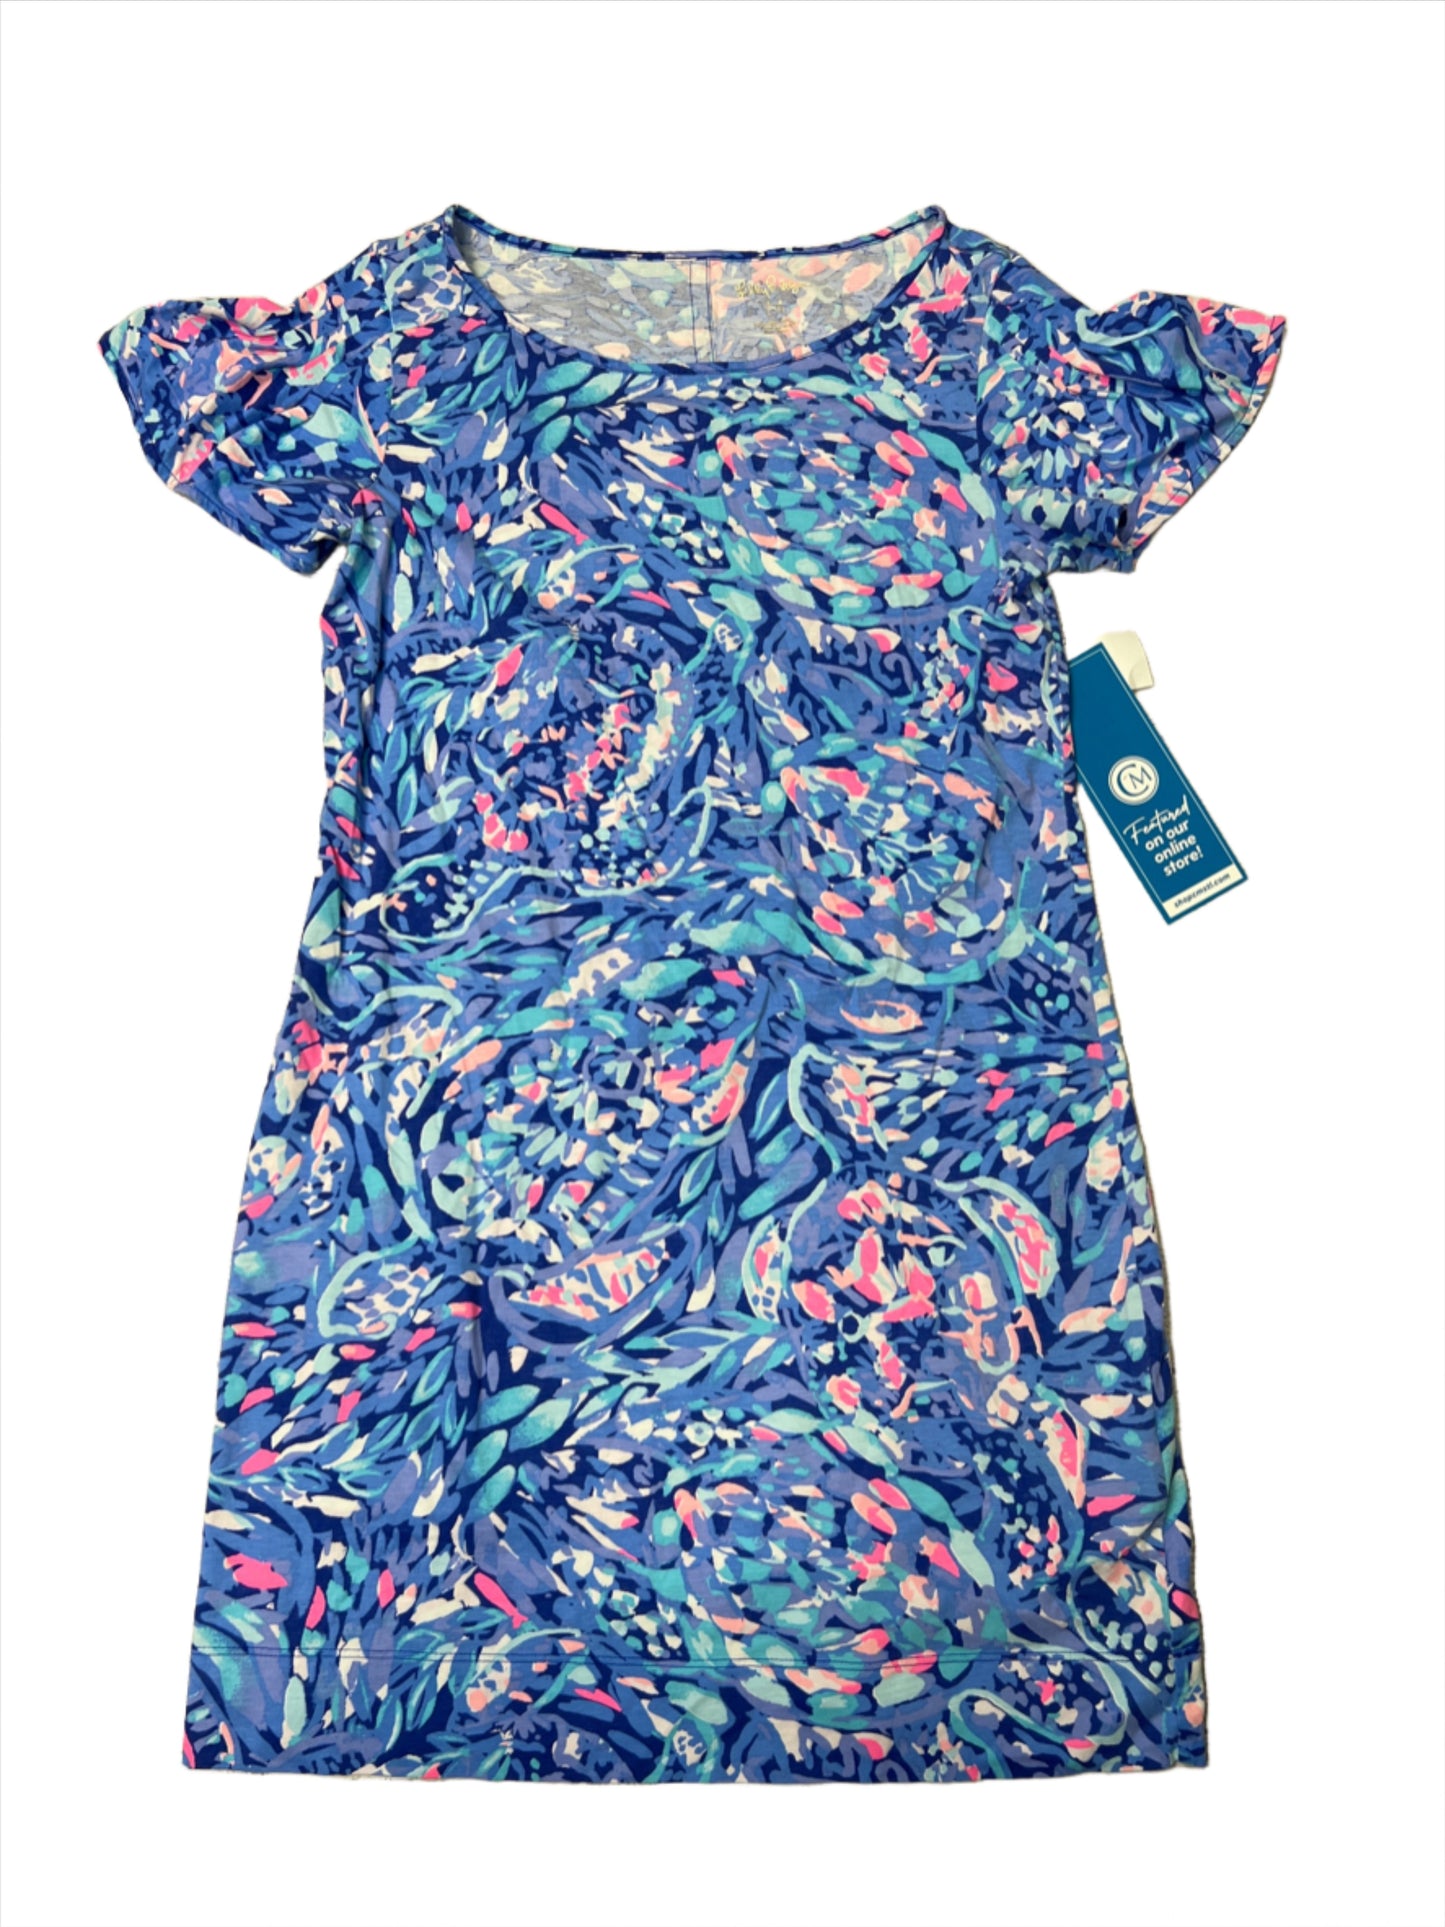 Blue Dress Casual Short Lilly Pulitzer, Size M